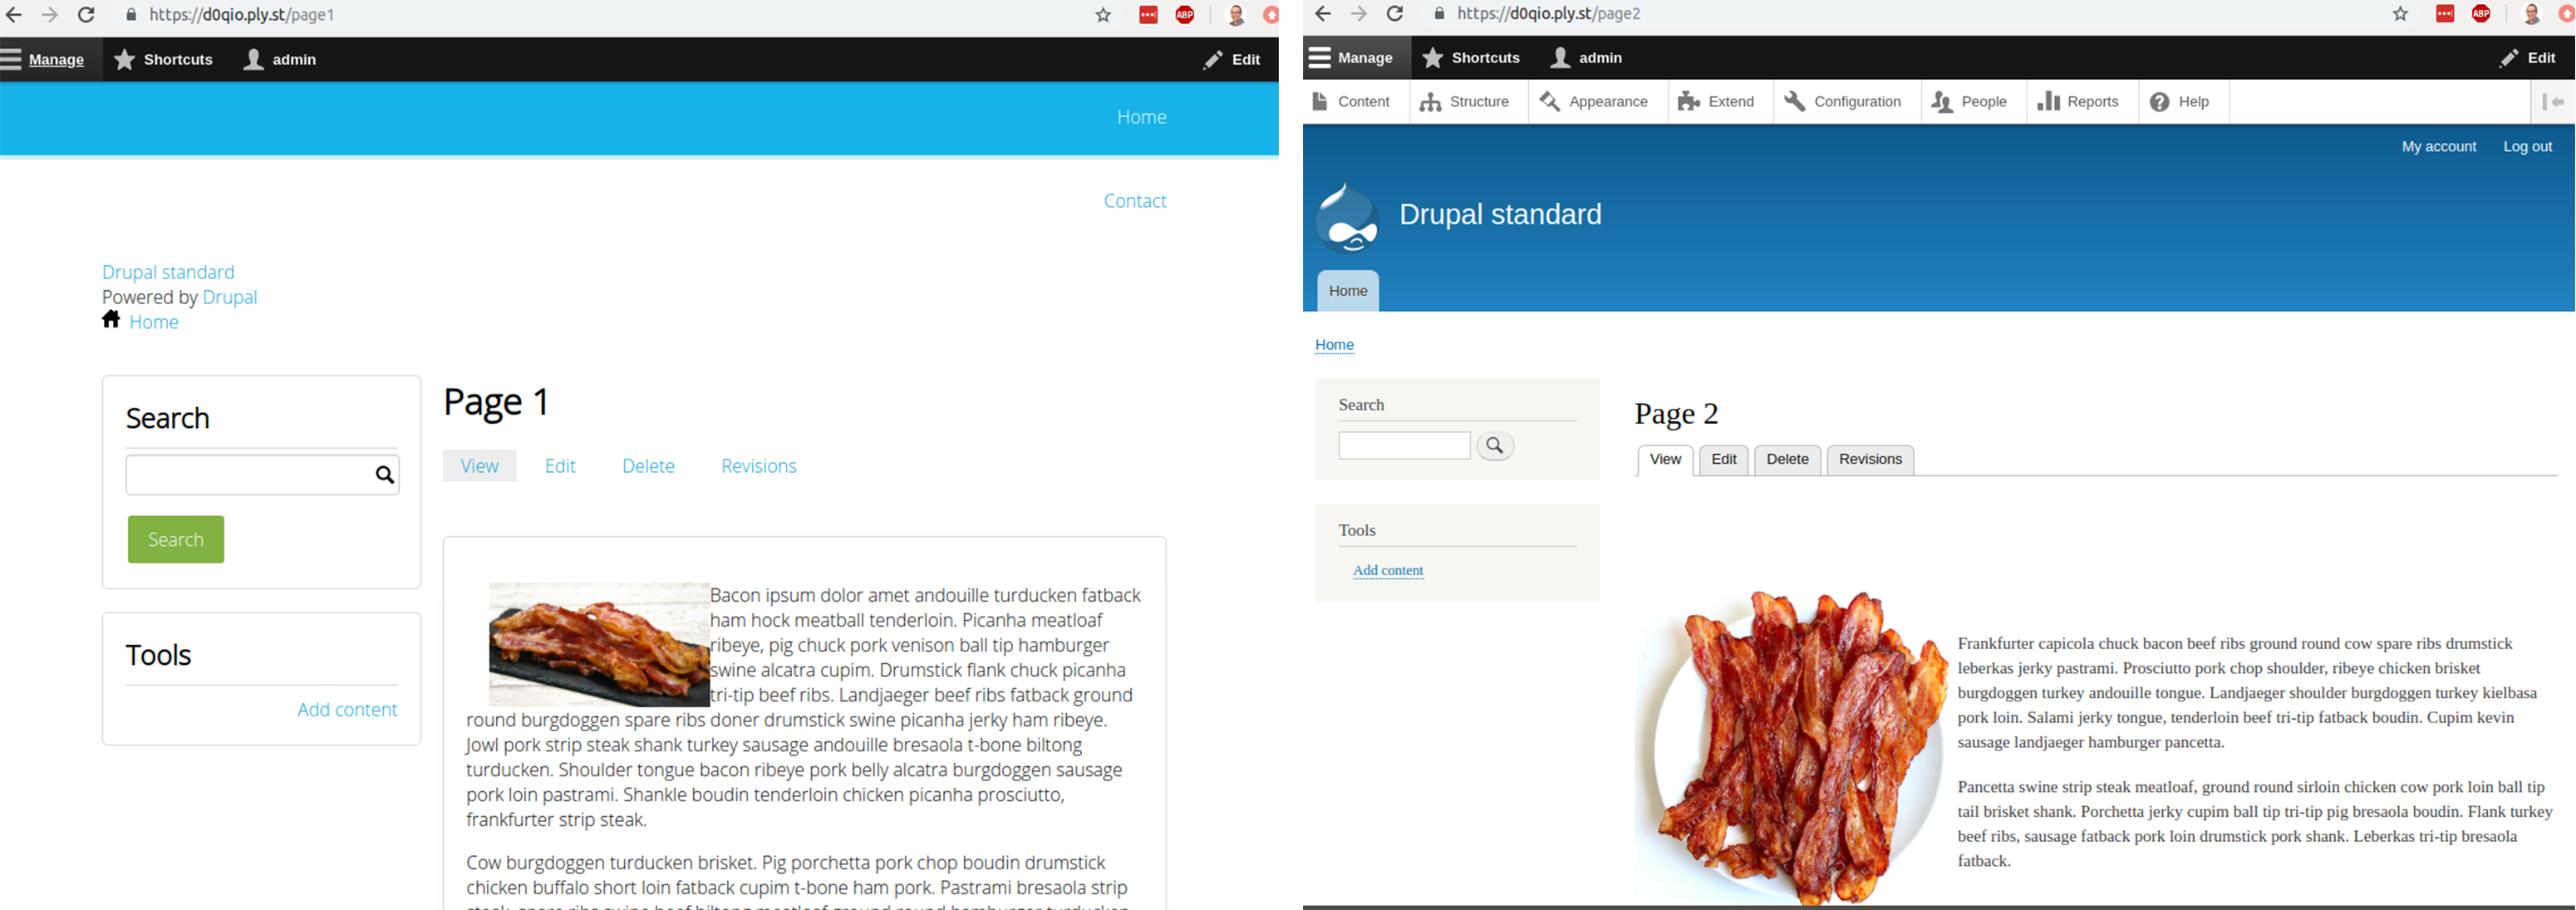 Screenshot of a Drupal 8 layout before and after updates were made